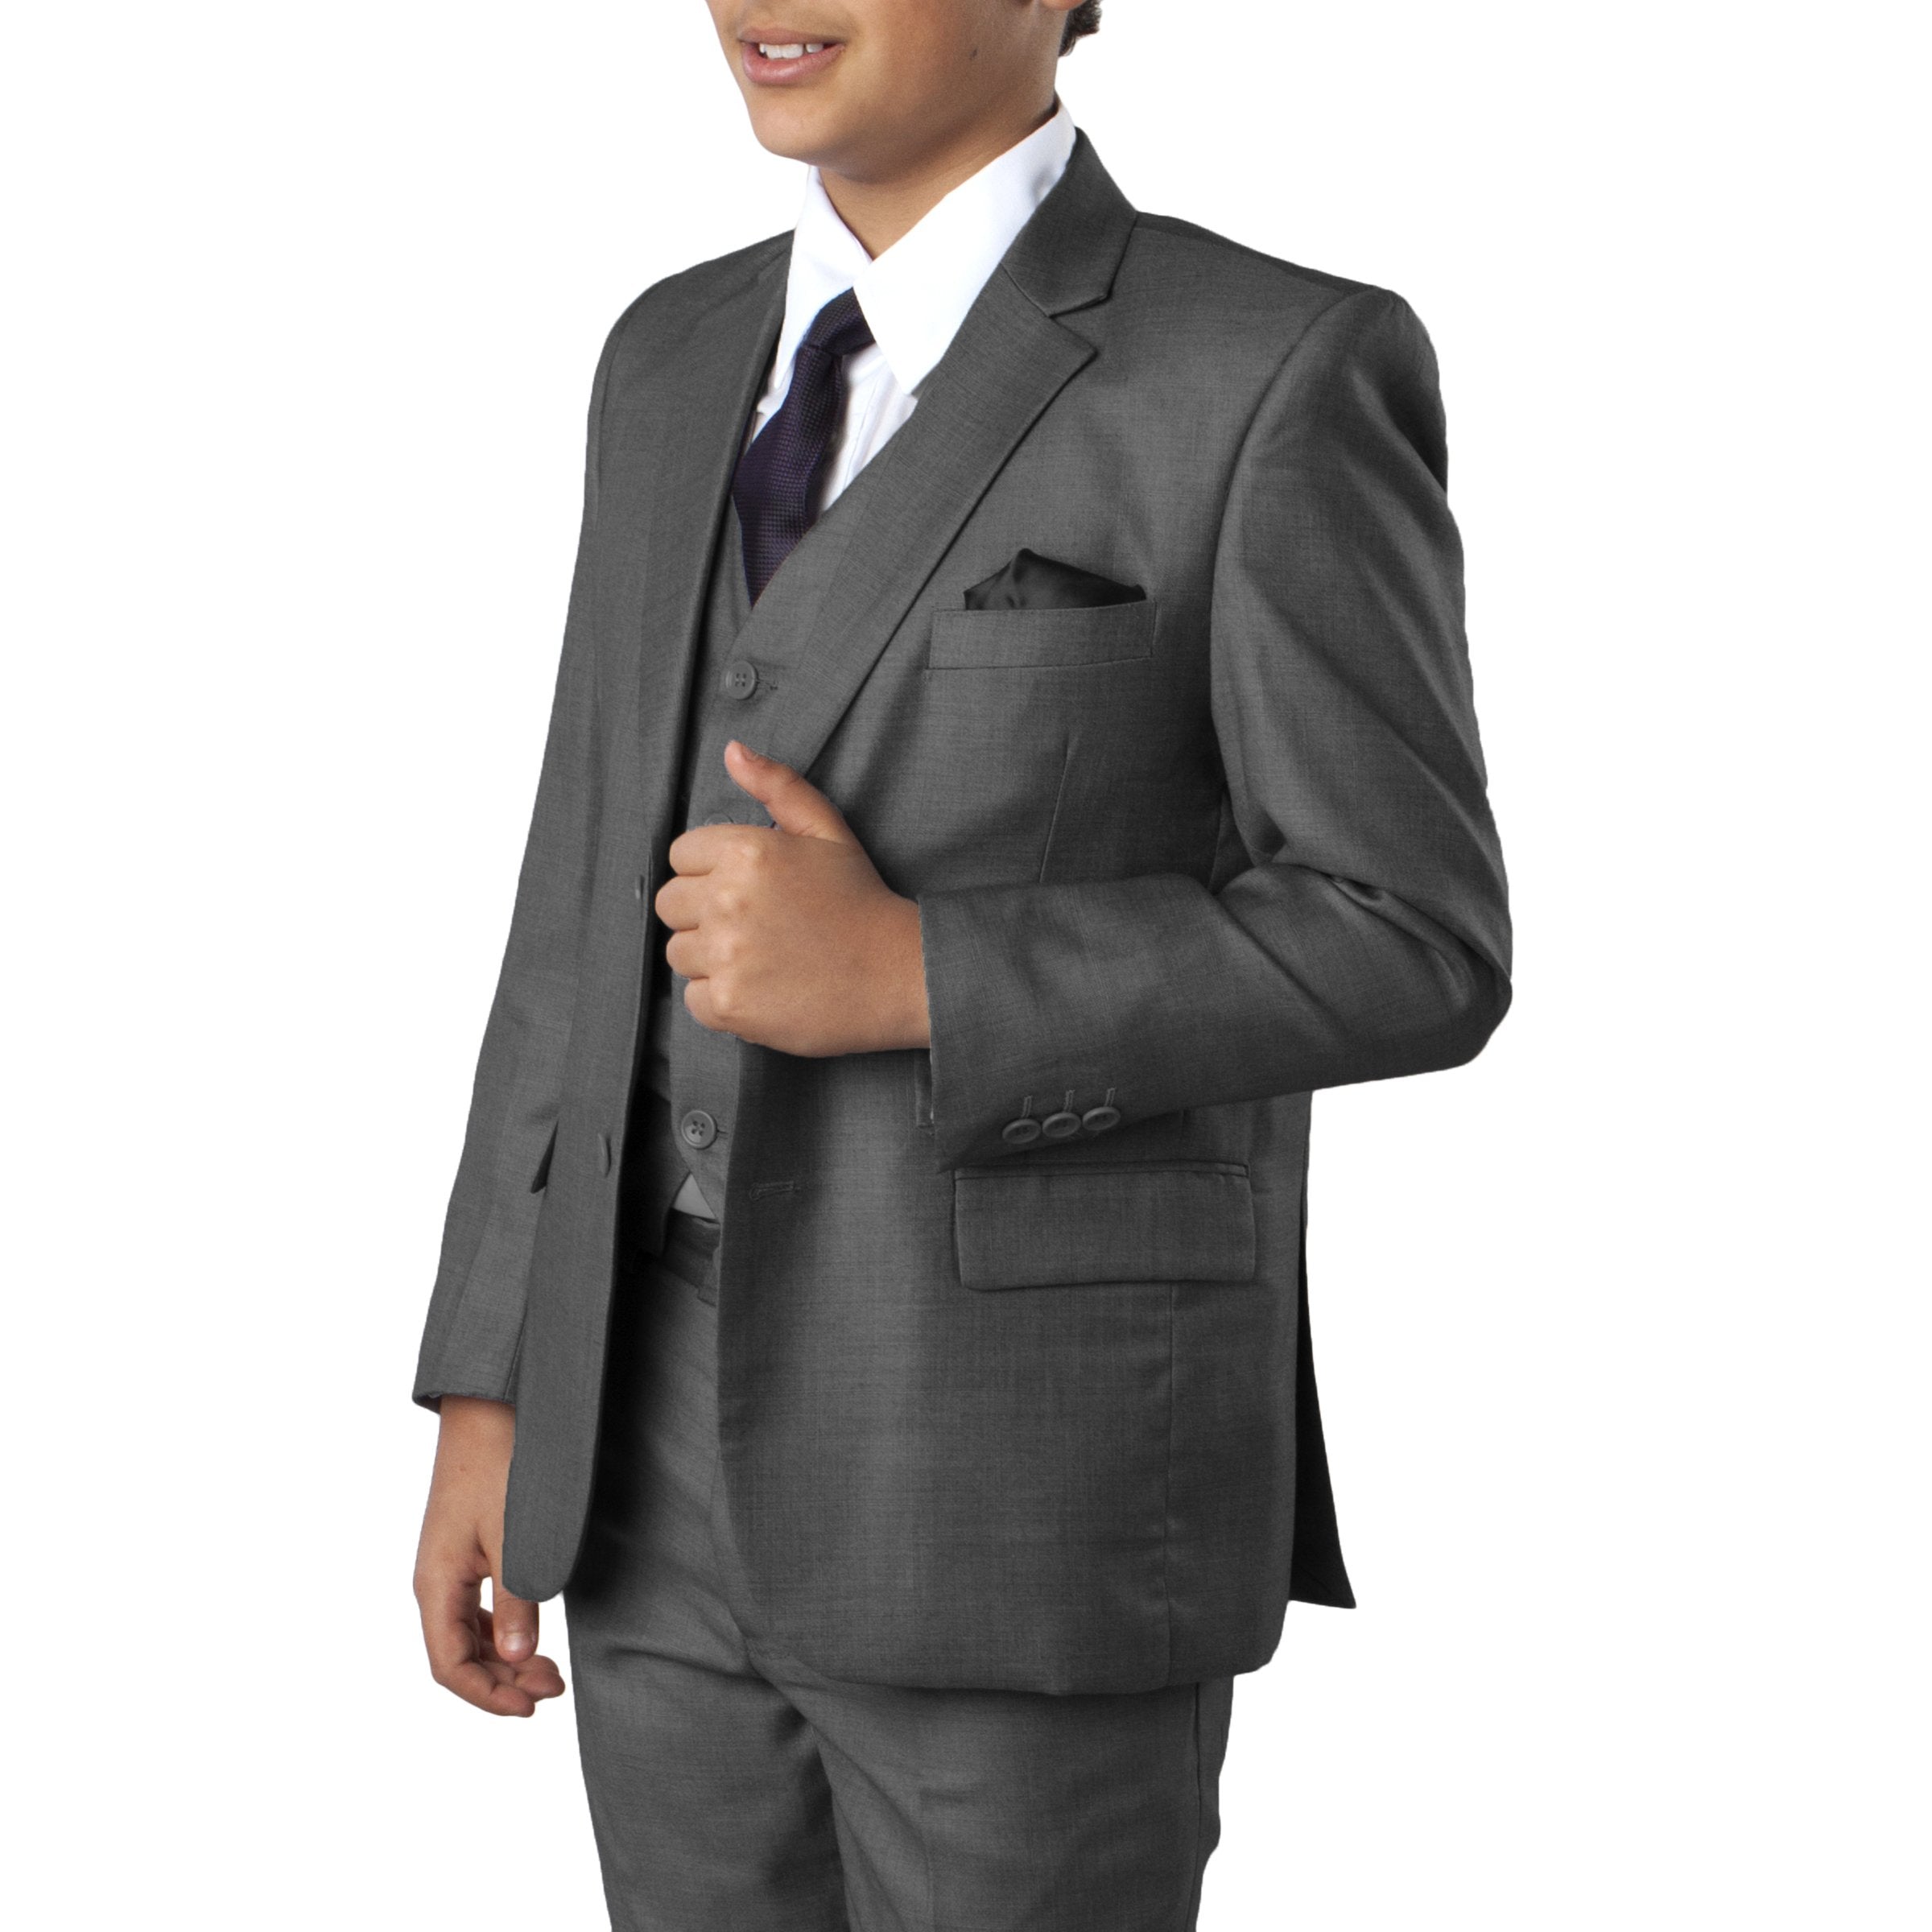 5-PIece Windowpane Suit With Matching Shirt & Tie Suits For Boy's